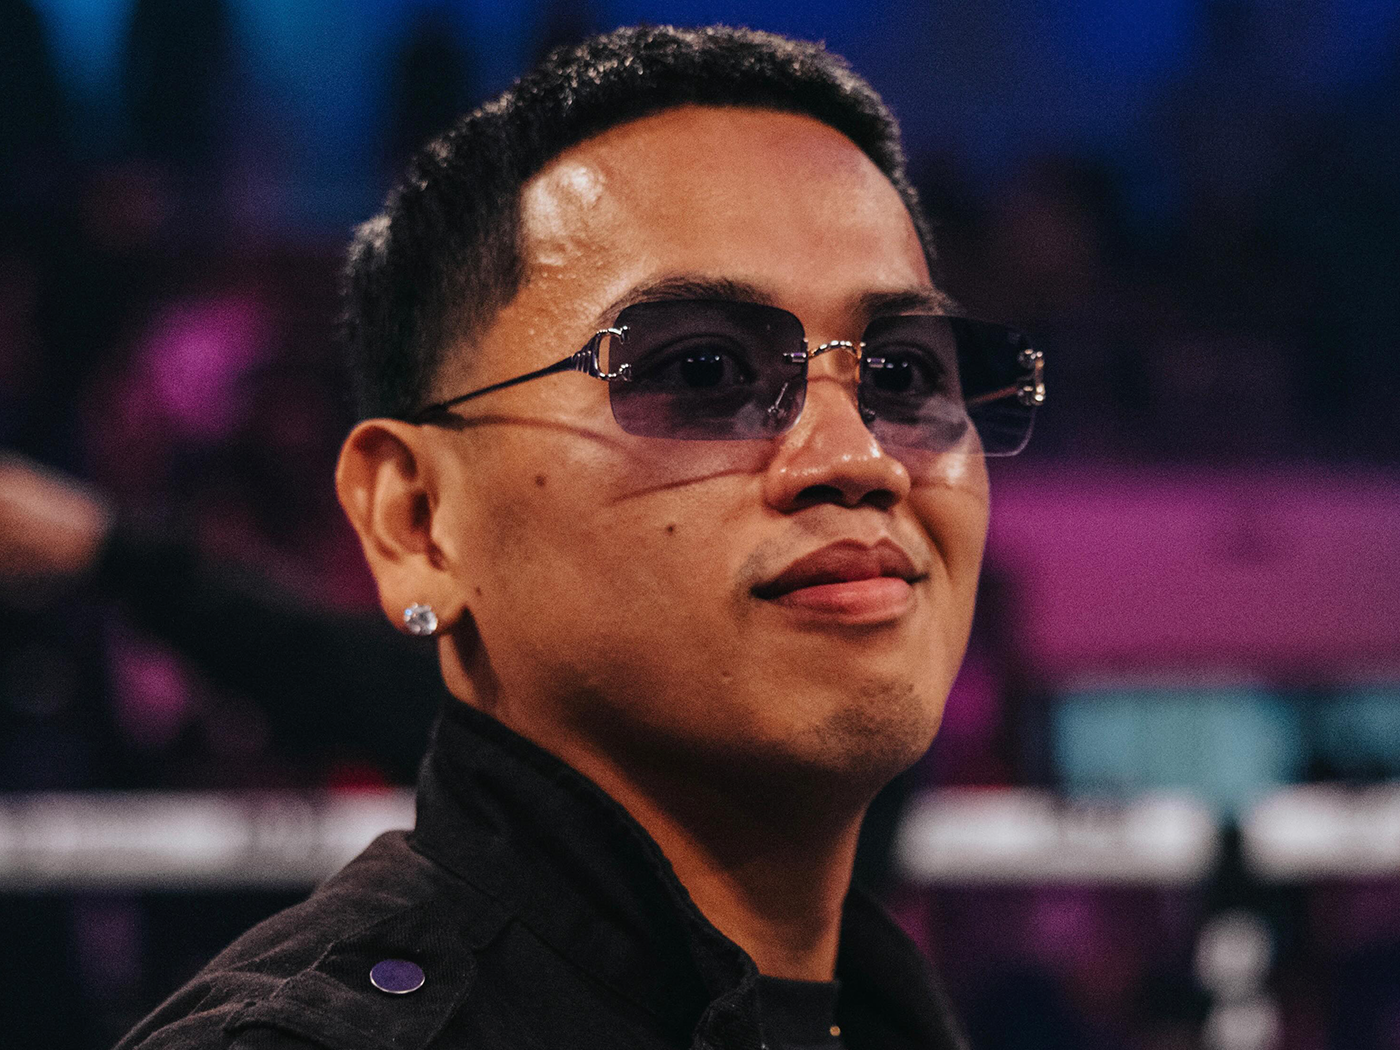 Salt Papi Takes on the KSI vs. Tommy Fury Undercard with Essntl Frames Shades